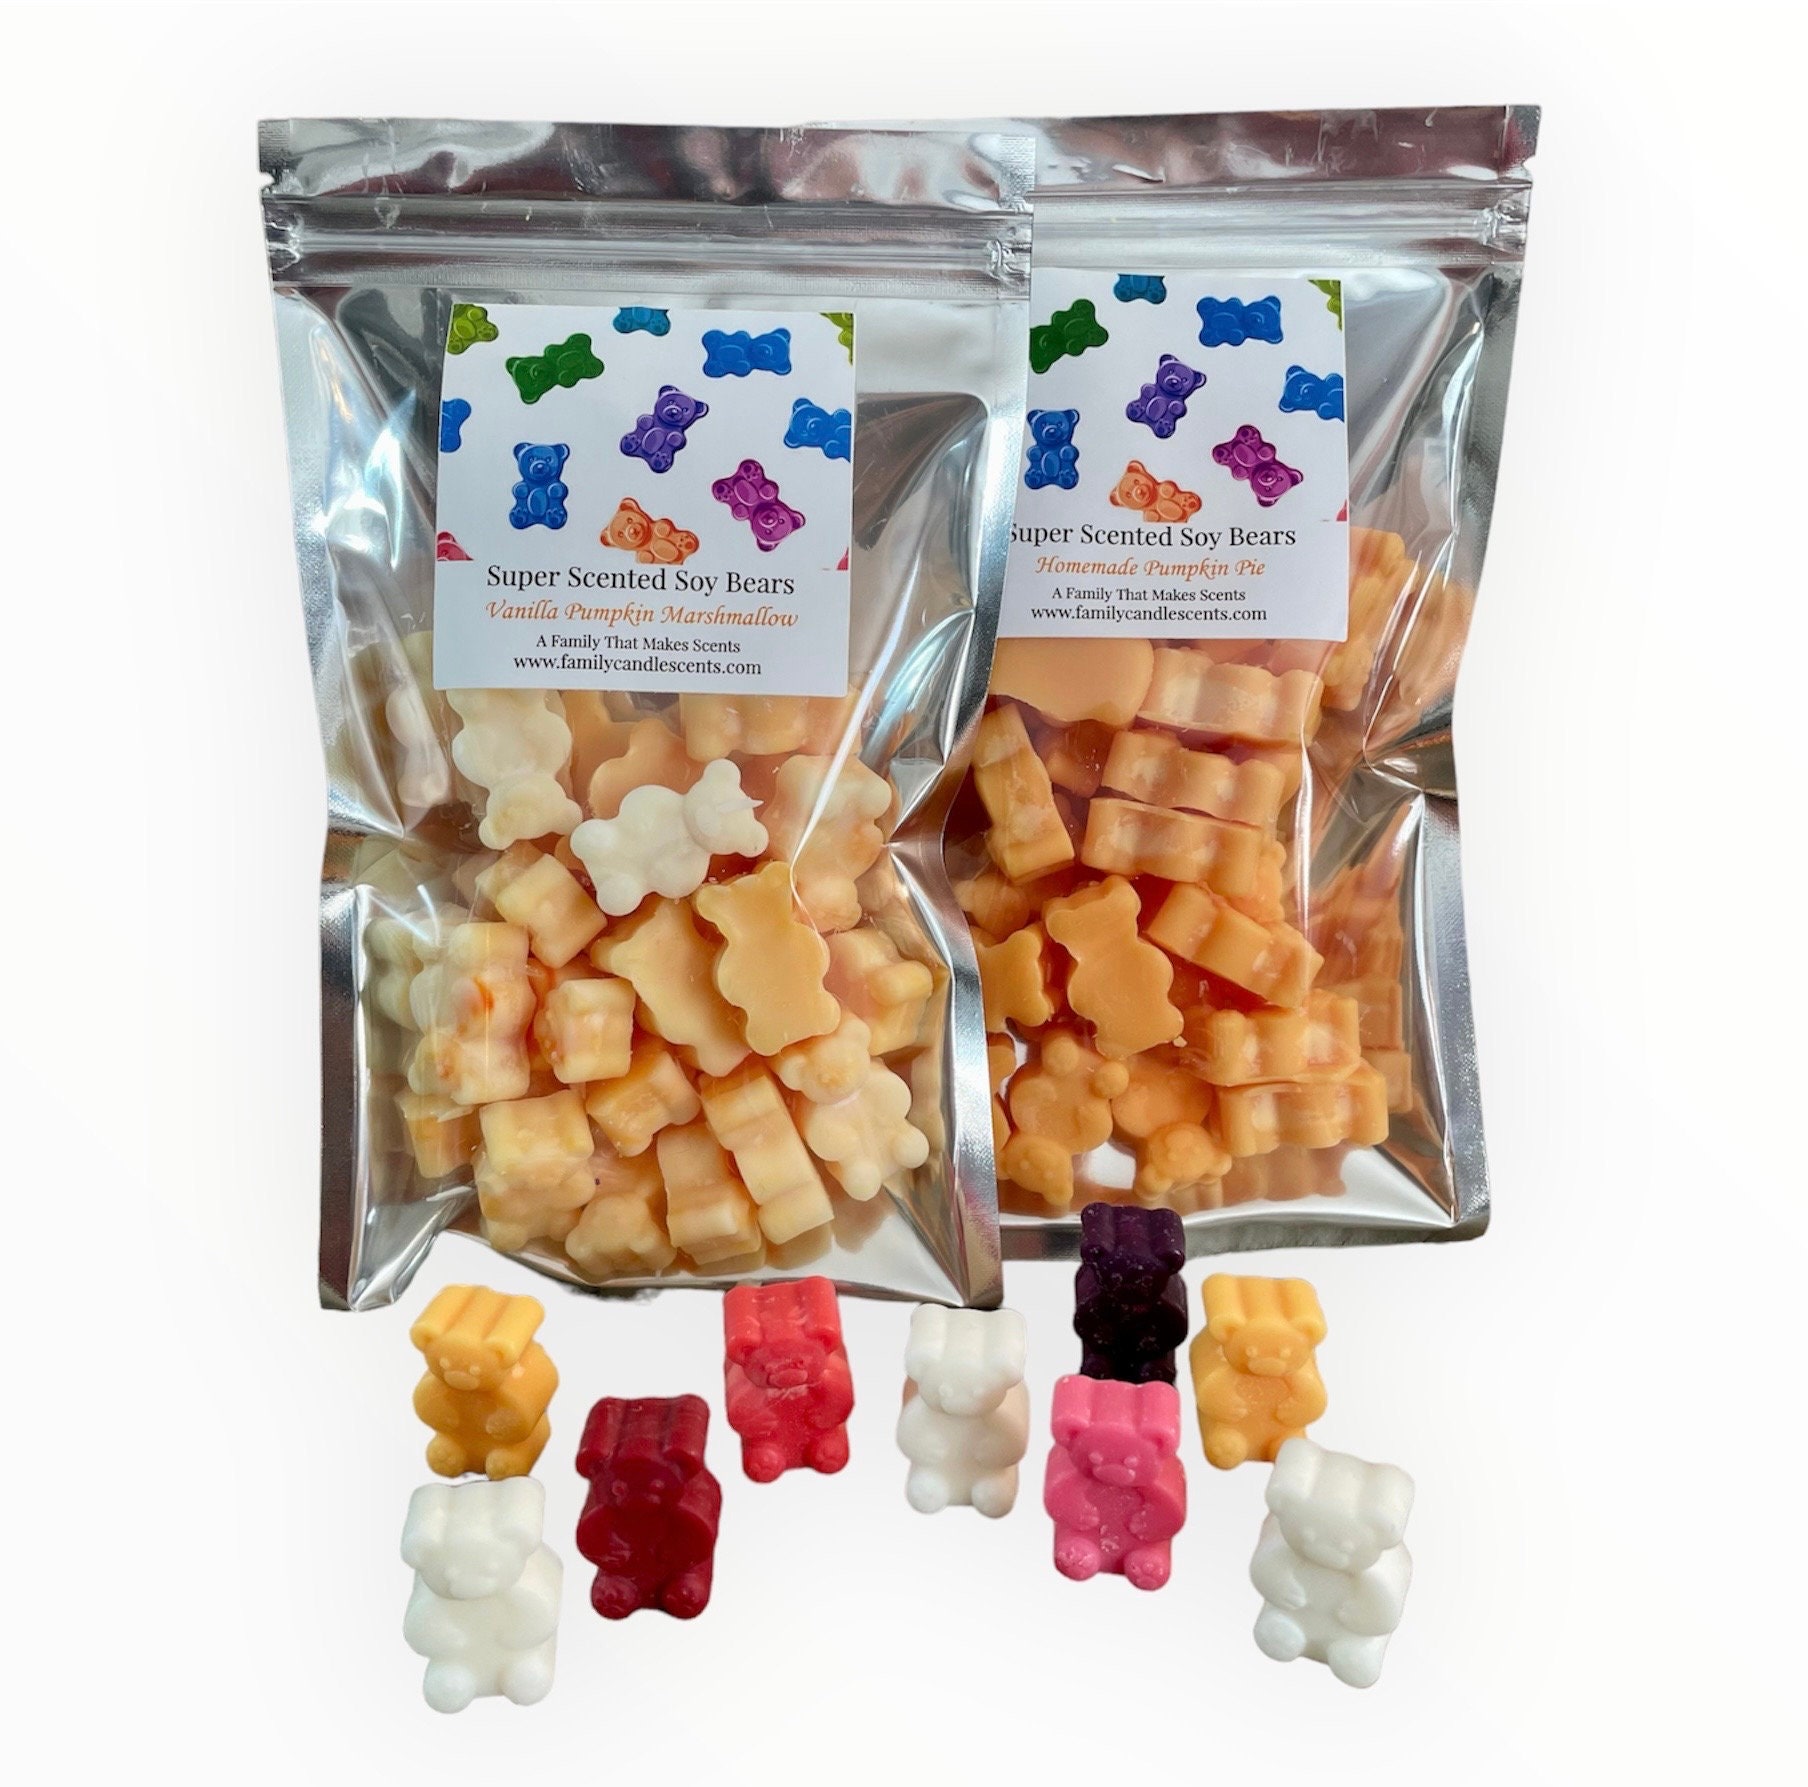 Cedar Scented Wax Melts 2 Pack With FREE SHIPPING Scented Soy Wax Cubes  Compare to Scentsy® Bars Free Shipping Cedar Warming Tarts 